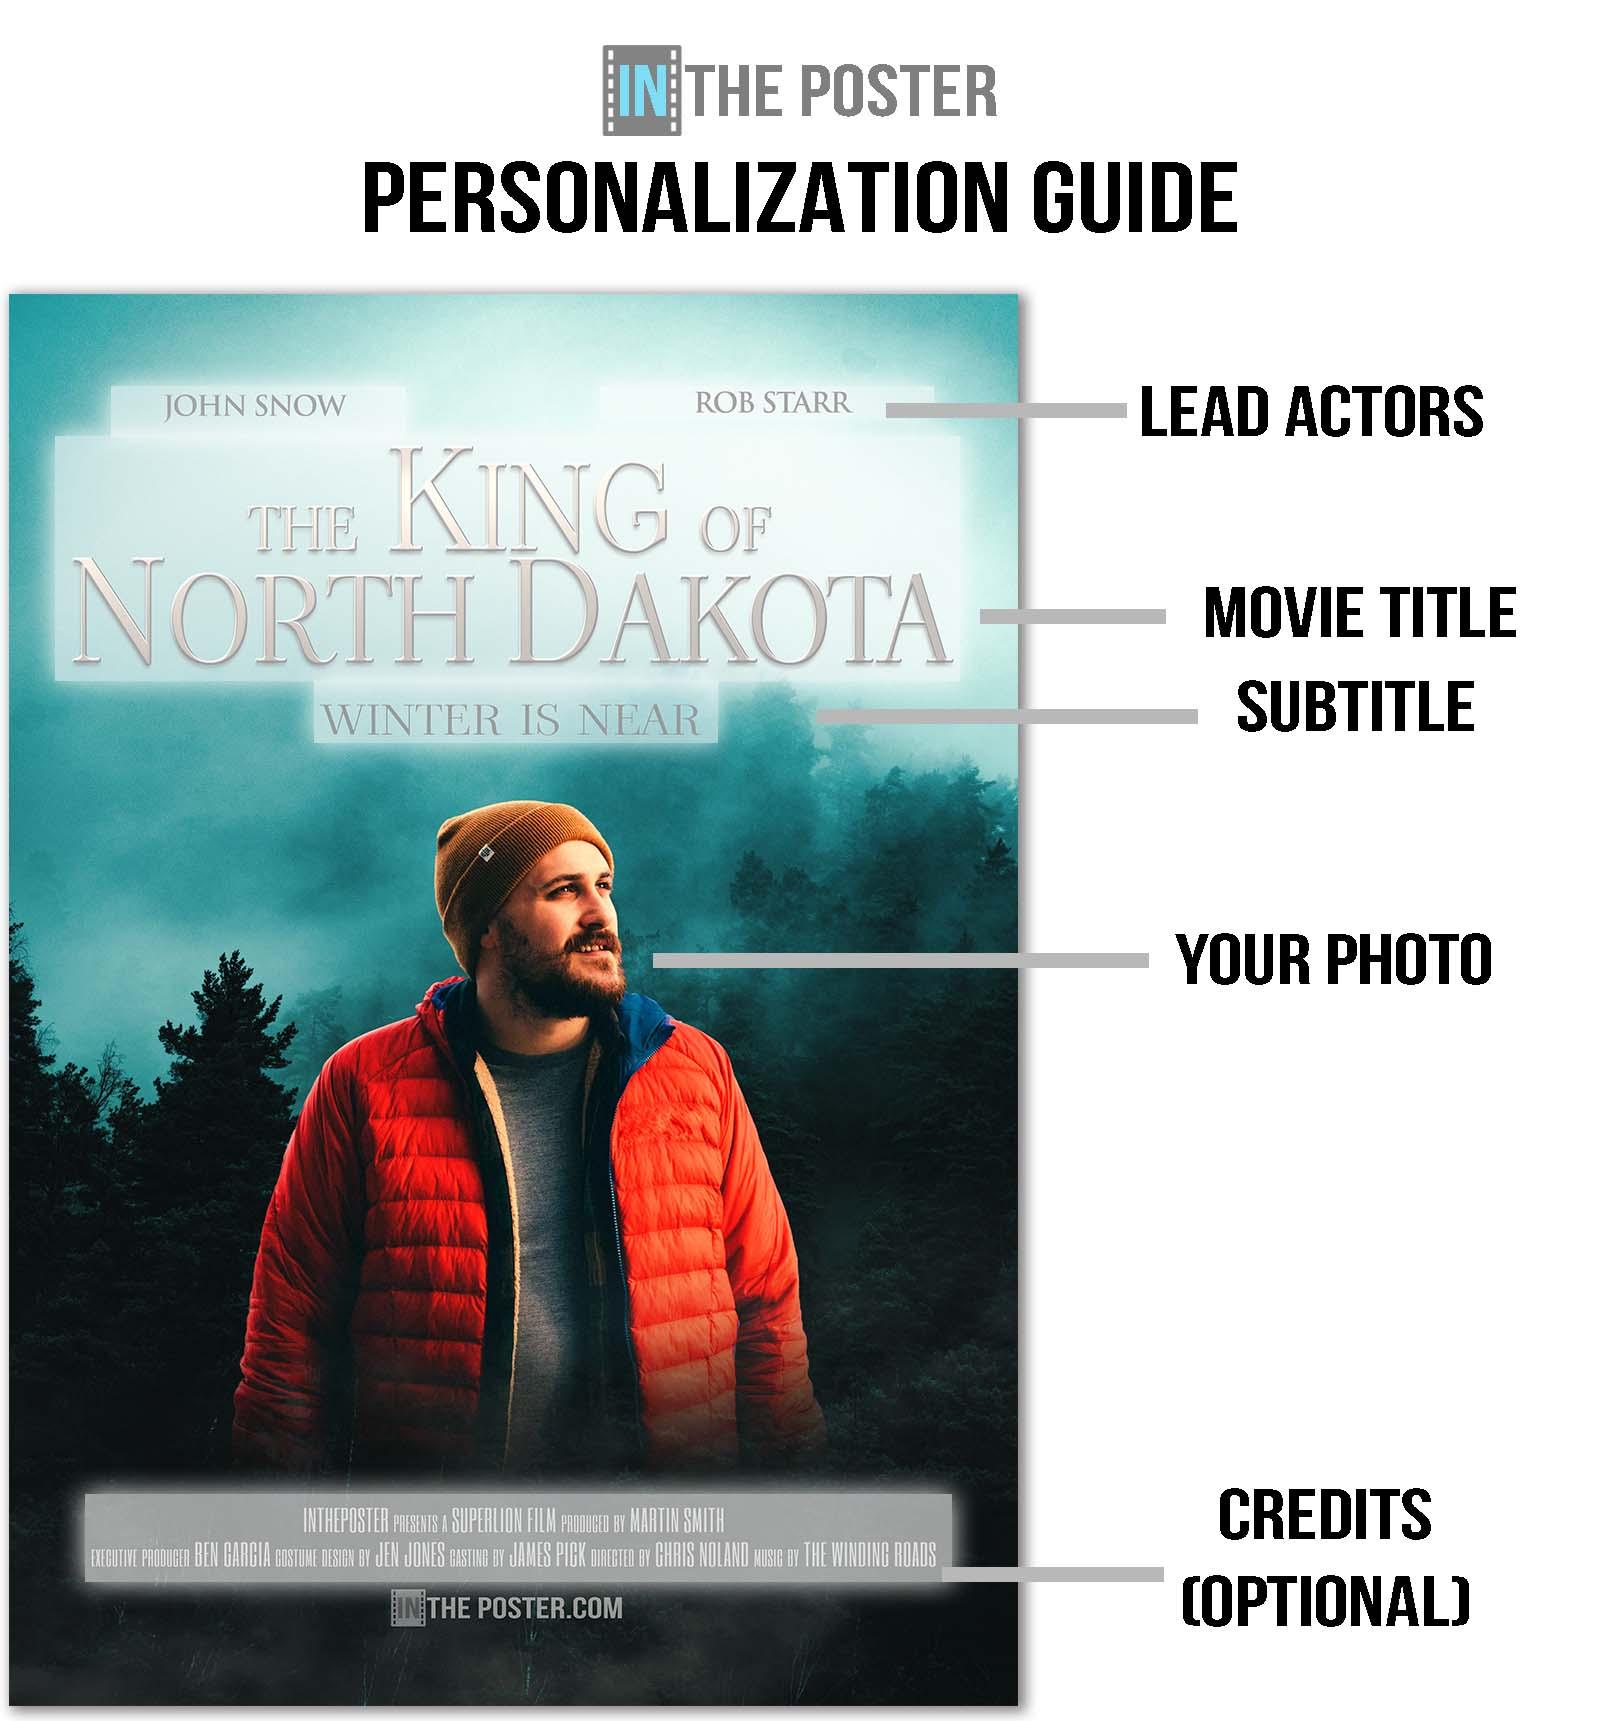 Fantasy movie poster personalization guide show the different elements of the movie poster that can be customized